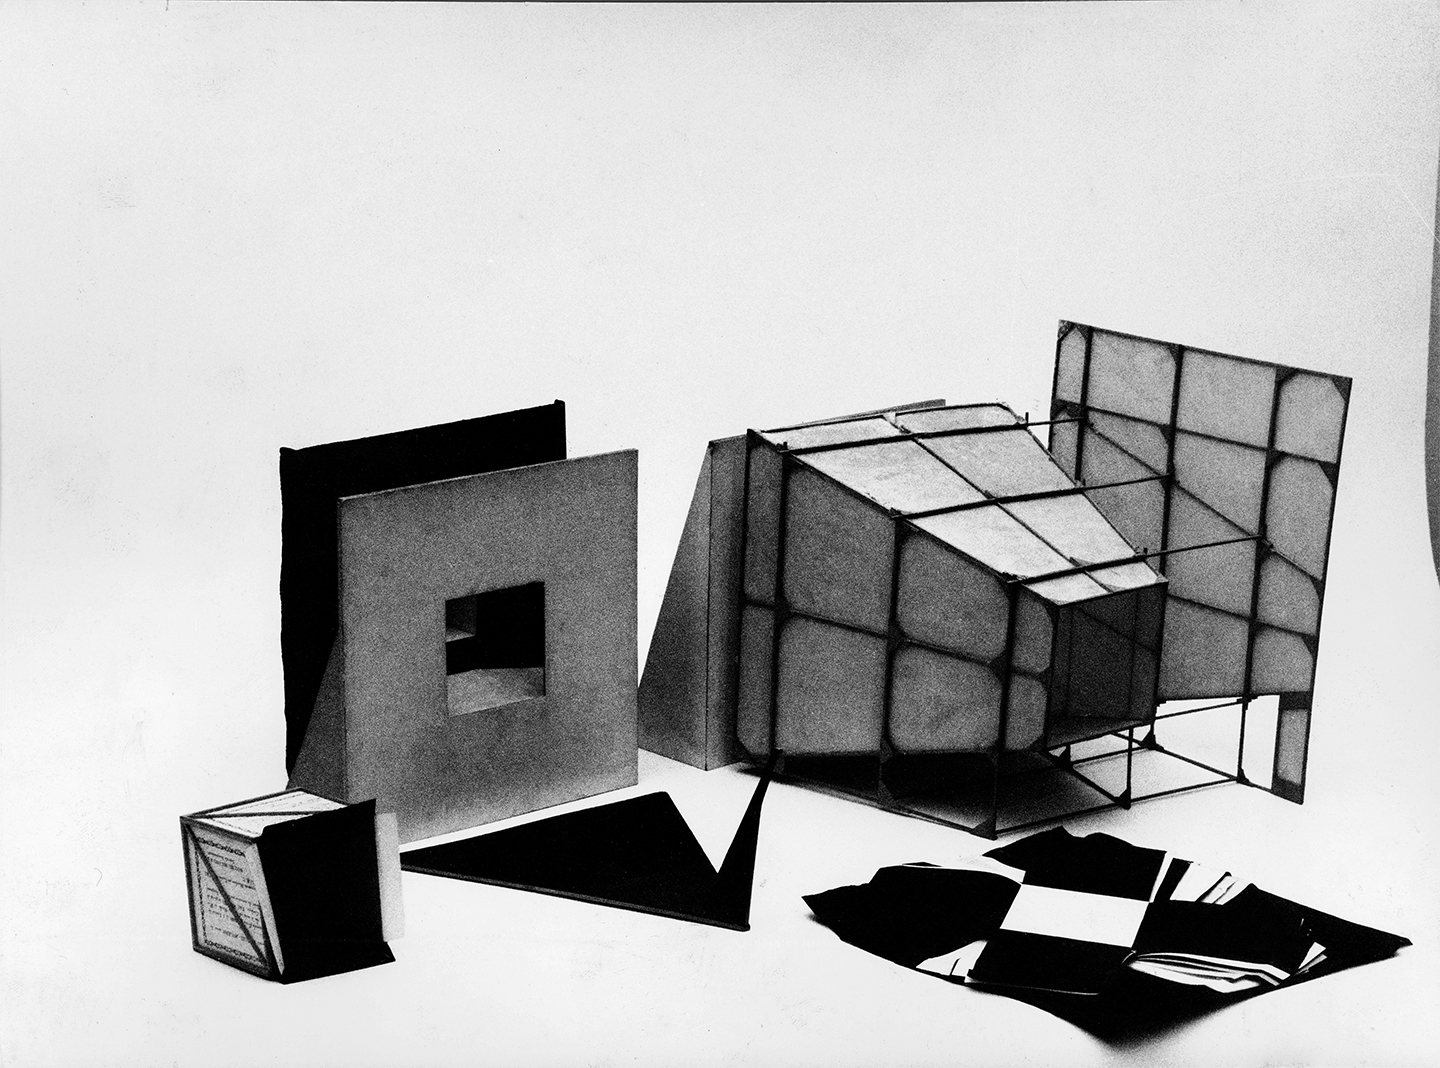 Equipment for research on colour and volume relations. 1952. Photo attributed to Paolo Monti. Courtesy of the Design Museum